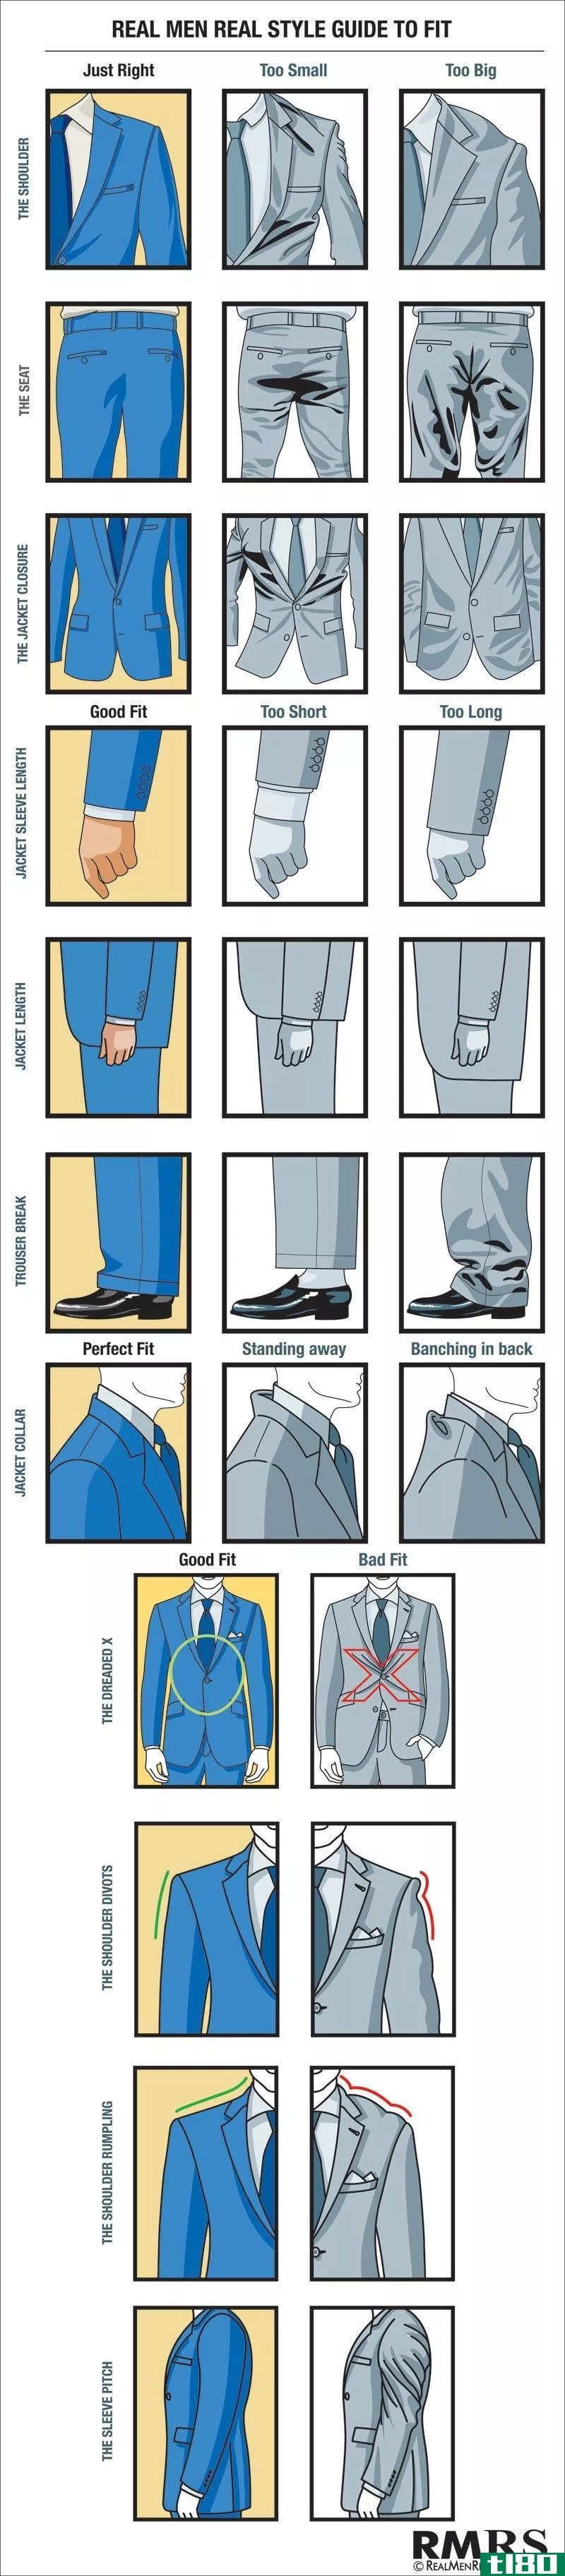 Illustration for article titled This Visual Guide Outlines How Men&#39;s Suits Should Fit